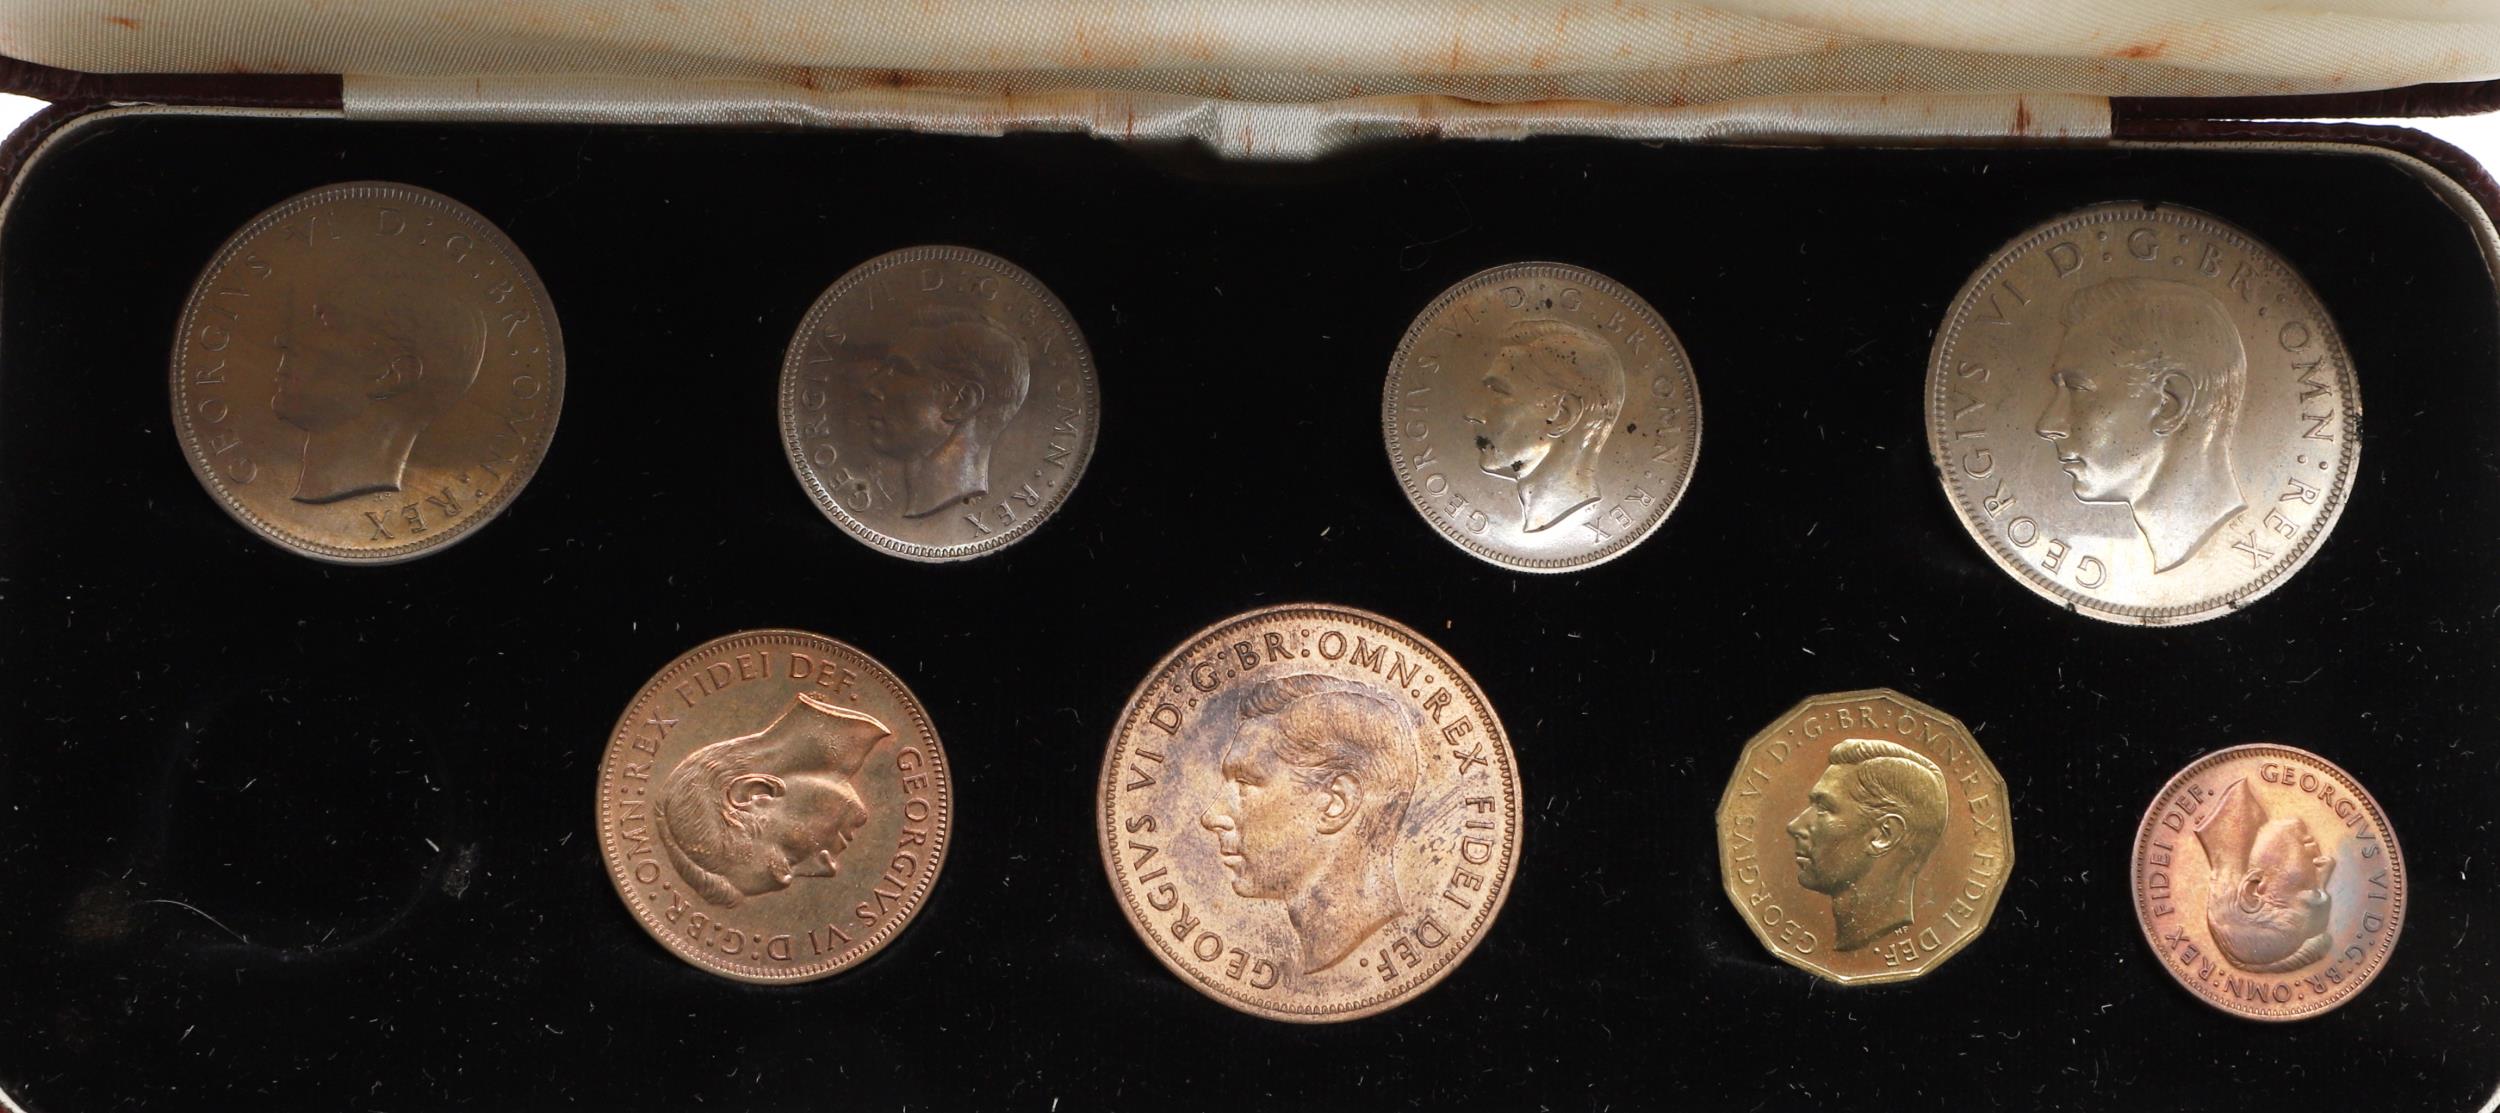 THREE MID 20TH CENTURY SPECIMEN COIN SETS, 1950, 1951 AND 1953. - Image 9 of 11